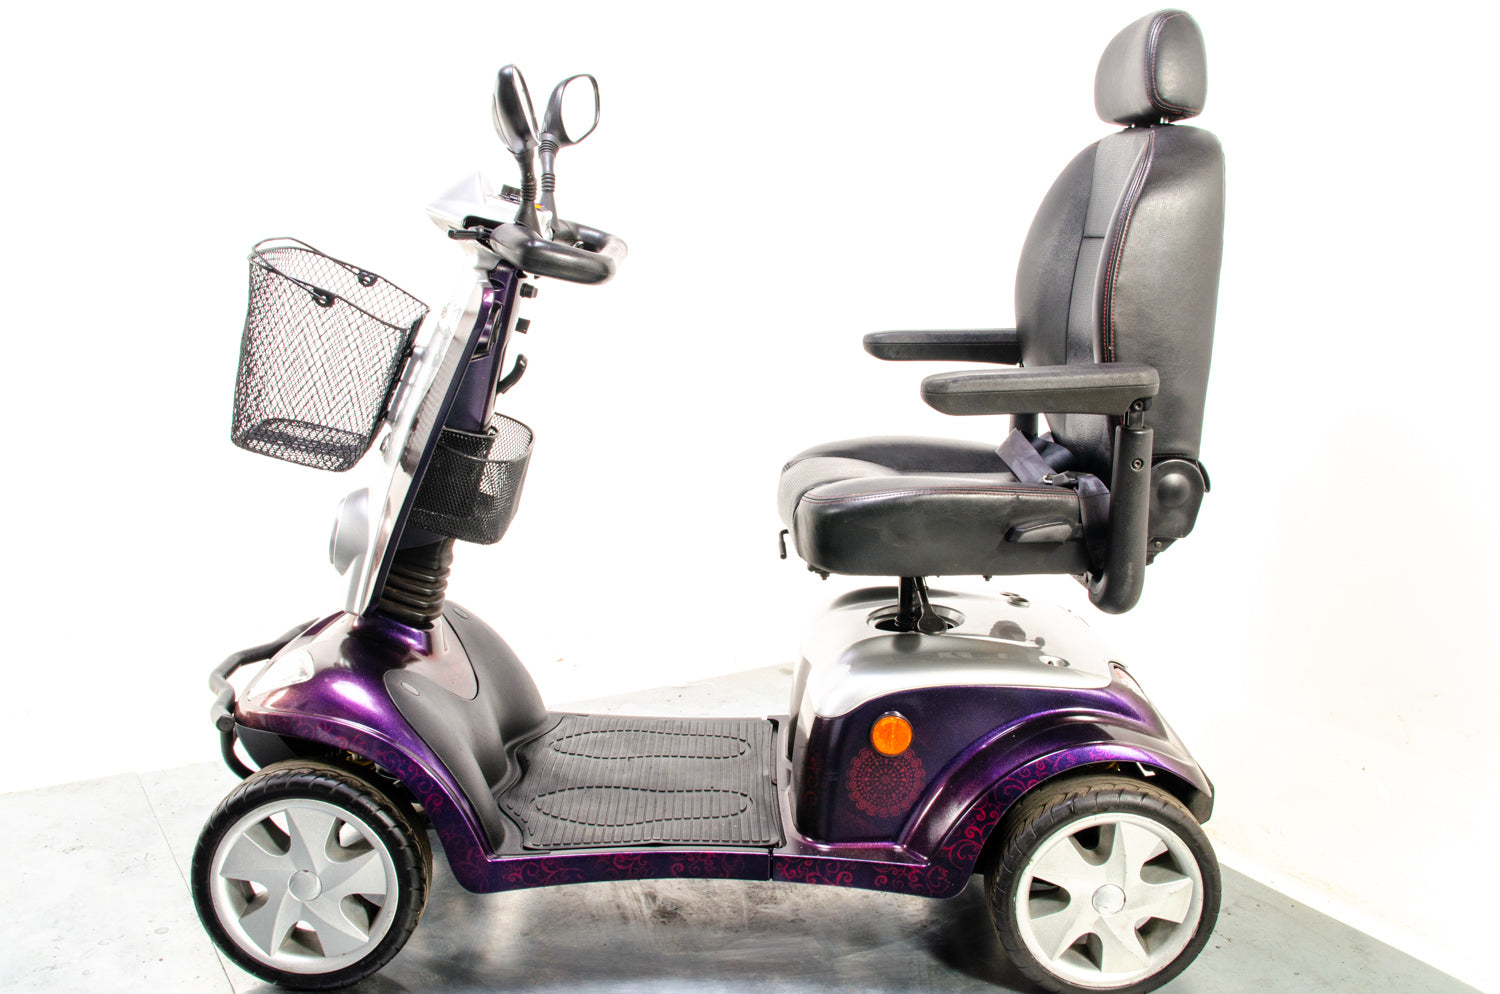 Kymco Maxi Off-Road All-Terrain Used Mobility Scooter 8mph Large Road Legal Custom Purple